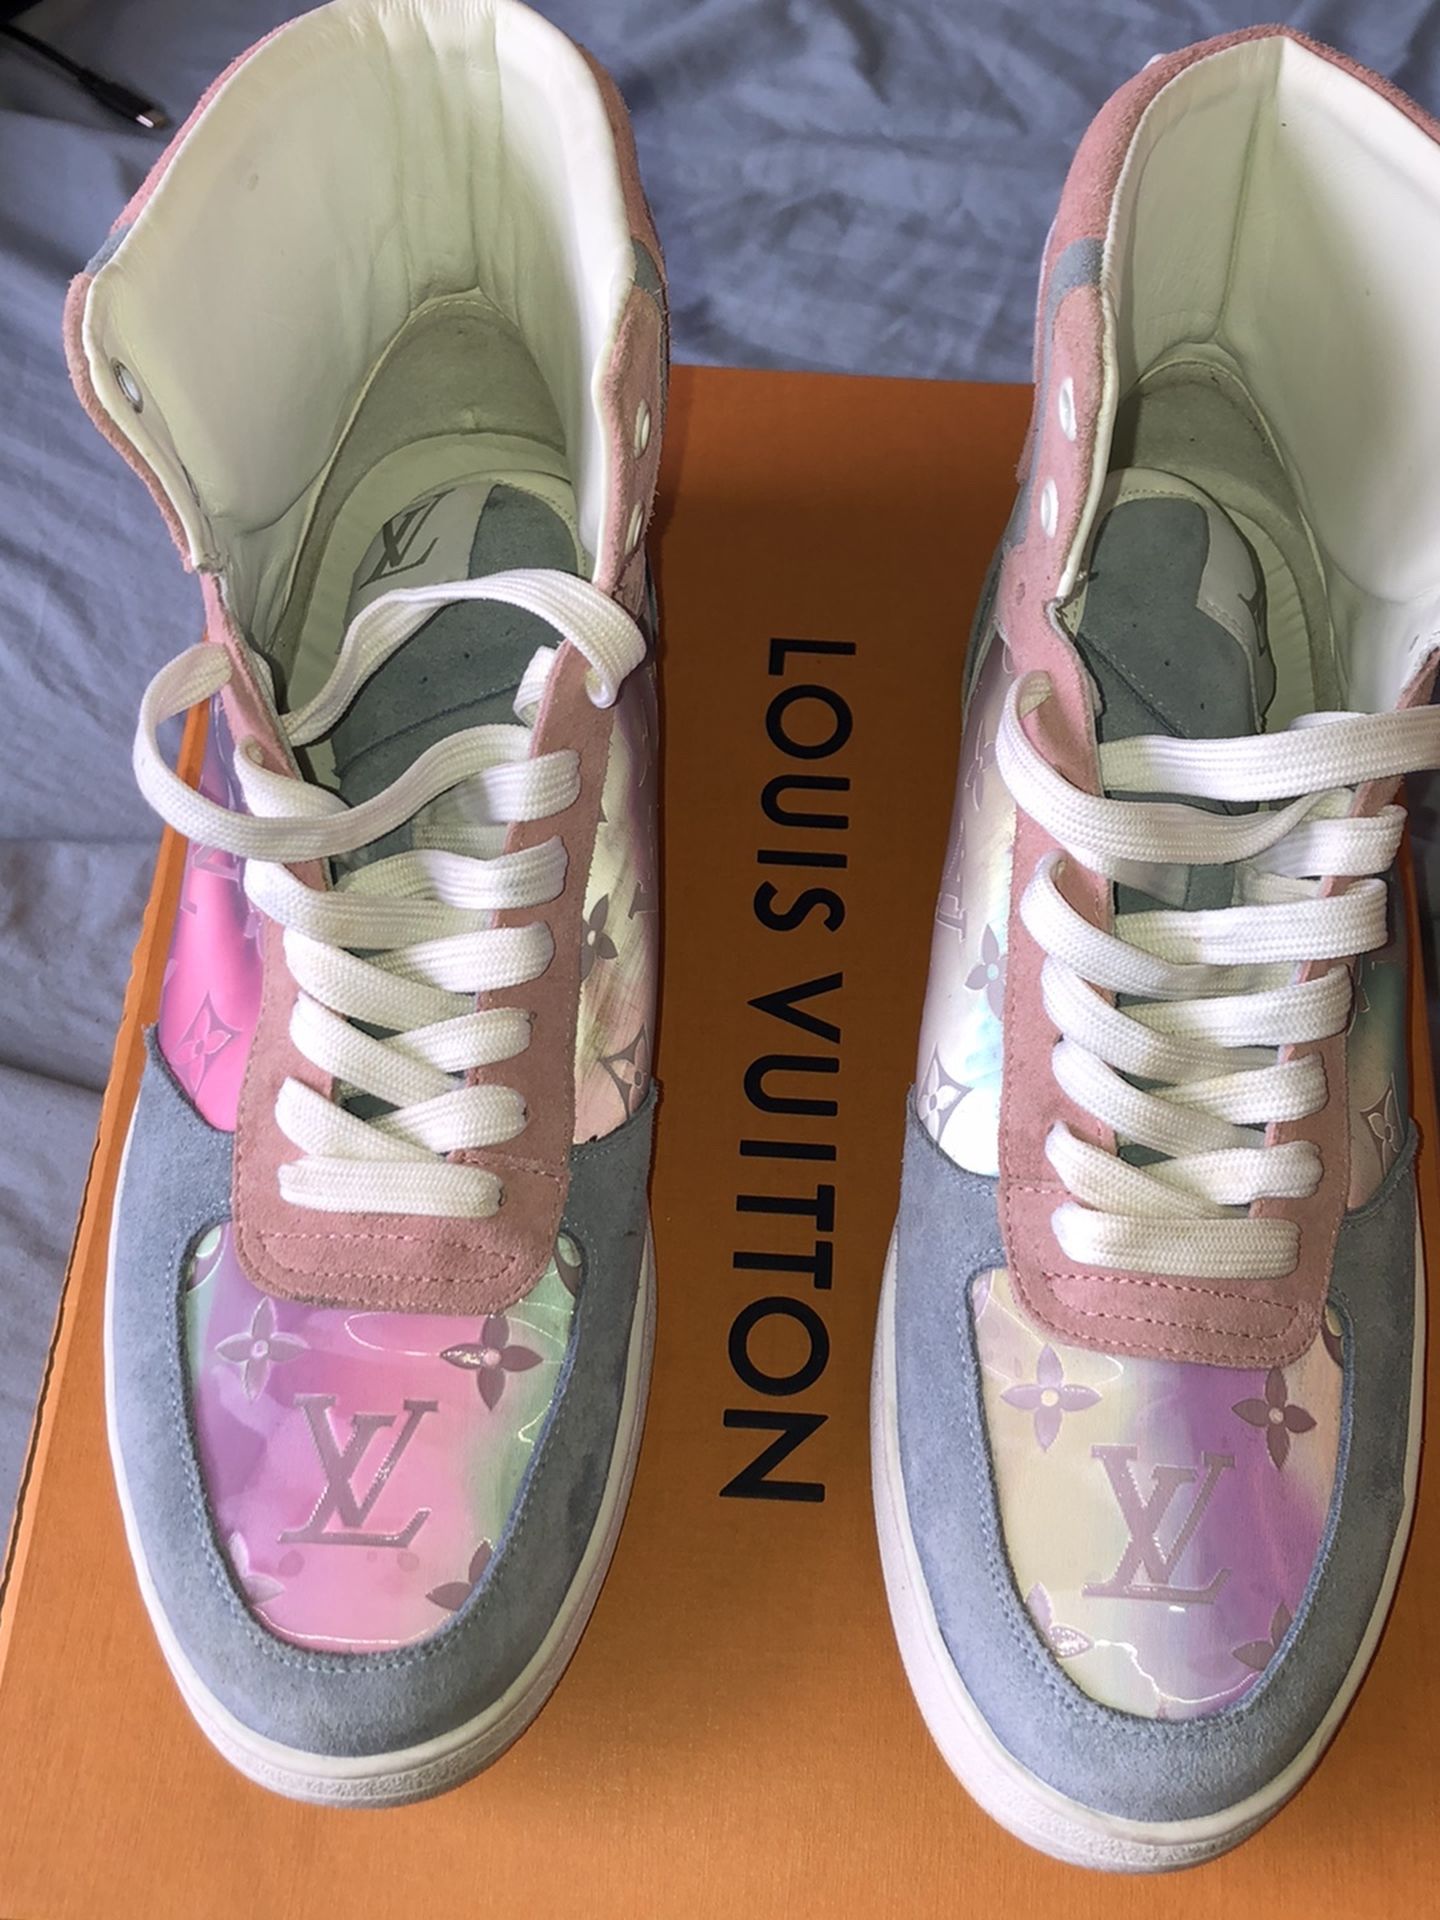 Louis Vuitton Men's Hologram Size 10 for Sale in Freeport, NY